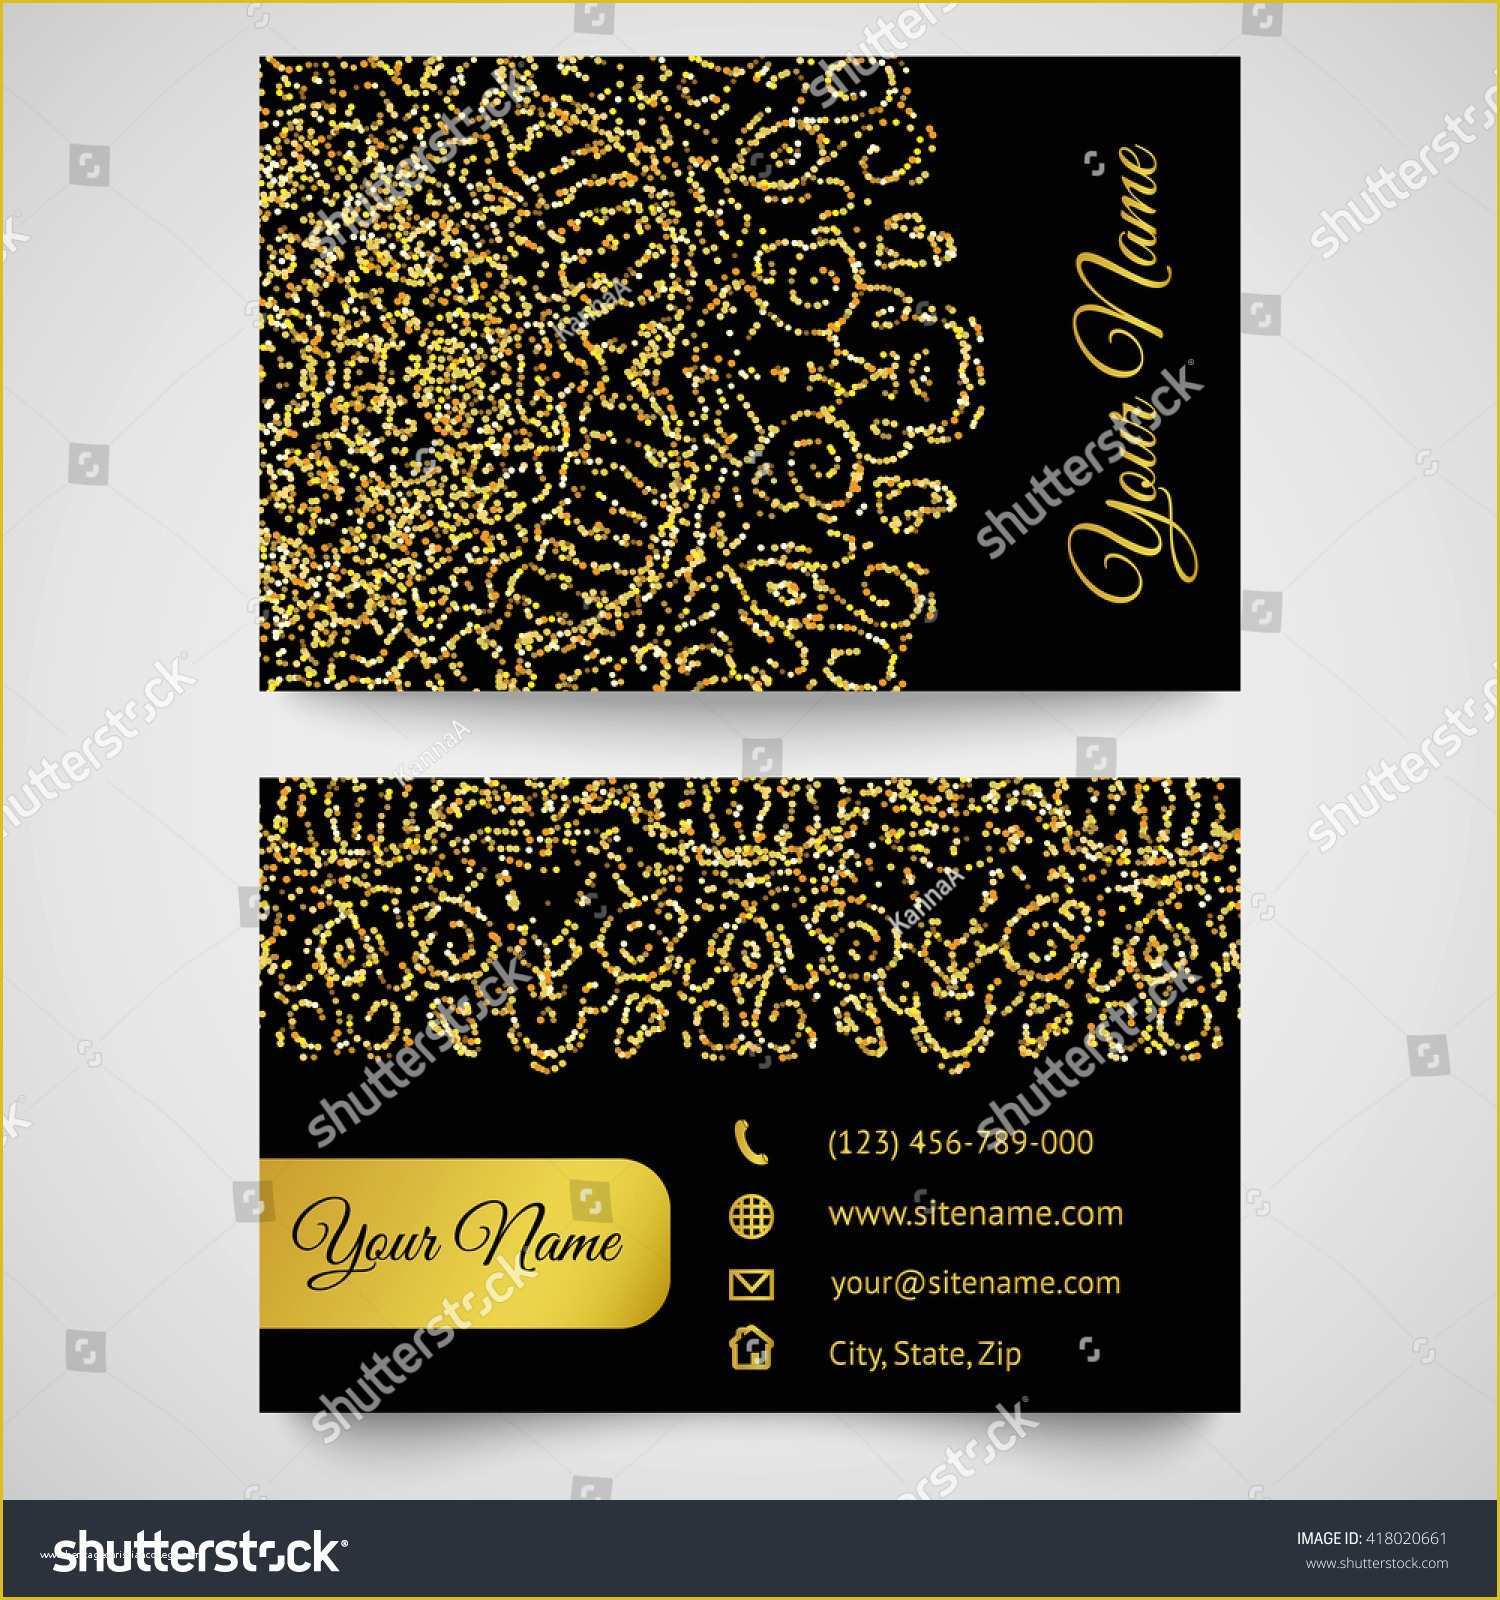 Gold Business Card Template Free Of Gold Business Card Template Bright Golden Stock